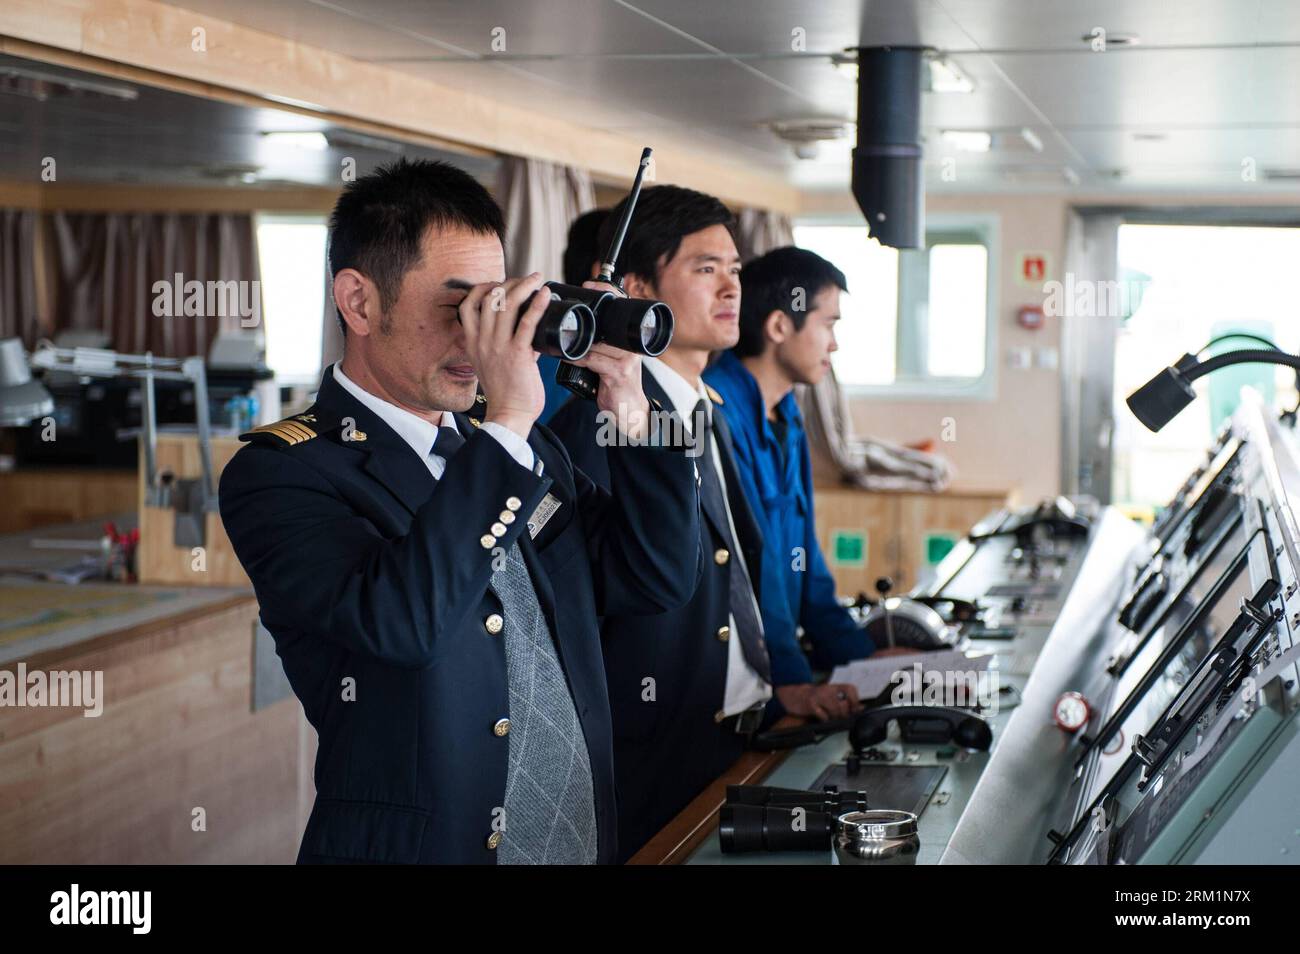 Bildnummer: 59604346  Datum: 24.04.2013  Copyright: imago/Xinhua NANJING, 2013 - Wang Lianmiao (1st L) checks sailing conditions using telescope aboard the Maple Star on the Yangtze River in east China s Jiangsu Province, April 24, 2013. Wang Lianmiao and Zhu Hui arrived at the port of Jingjiang on the morning of April 24, 2013. Both men are inland waterway pilots from the Yangtze River Pilot Centre. Awaiting them was the Maple Star, a 180-meter-long Marshall Islands-flagged cargo ship with a gross register tonnage of over 23,000. Under their pilotage, the Maple Star was to veer 180 degrees an Stock Photo